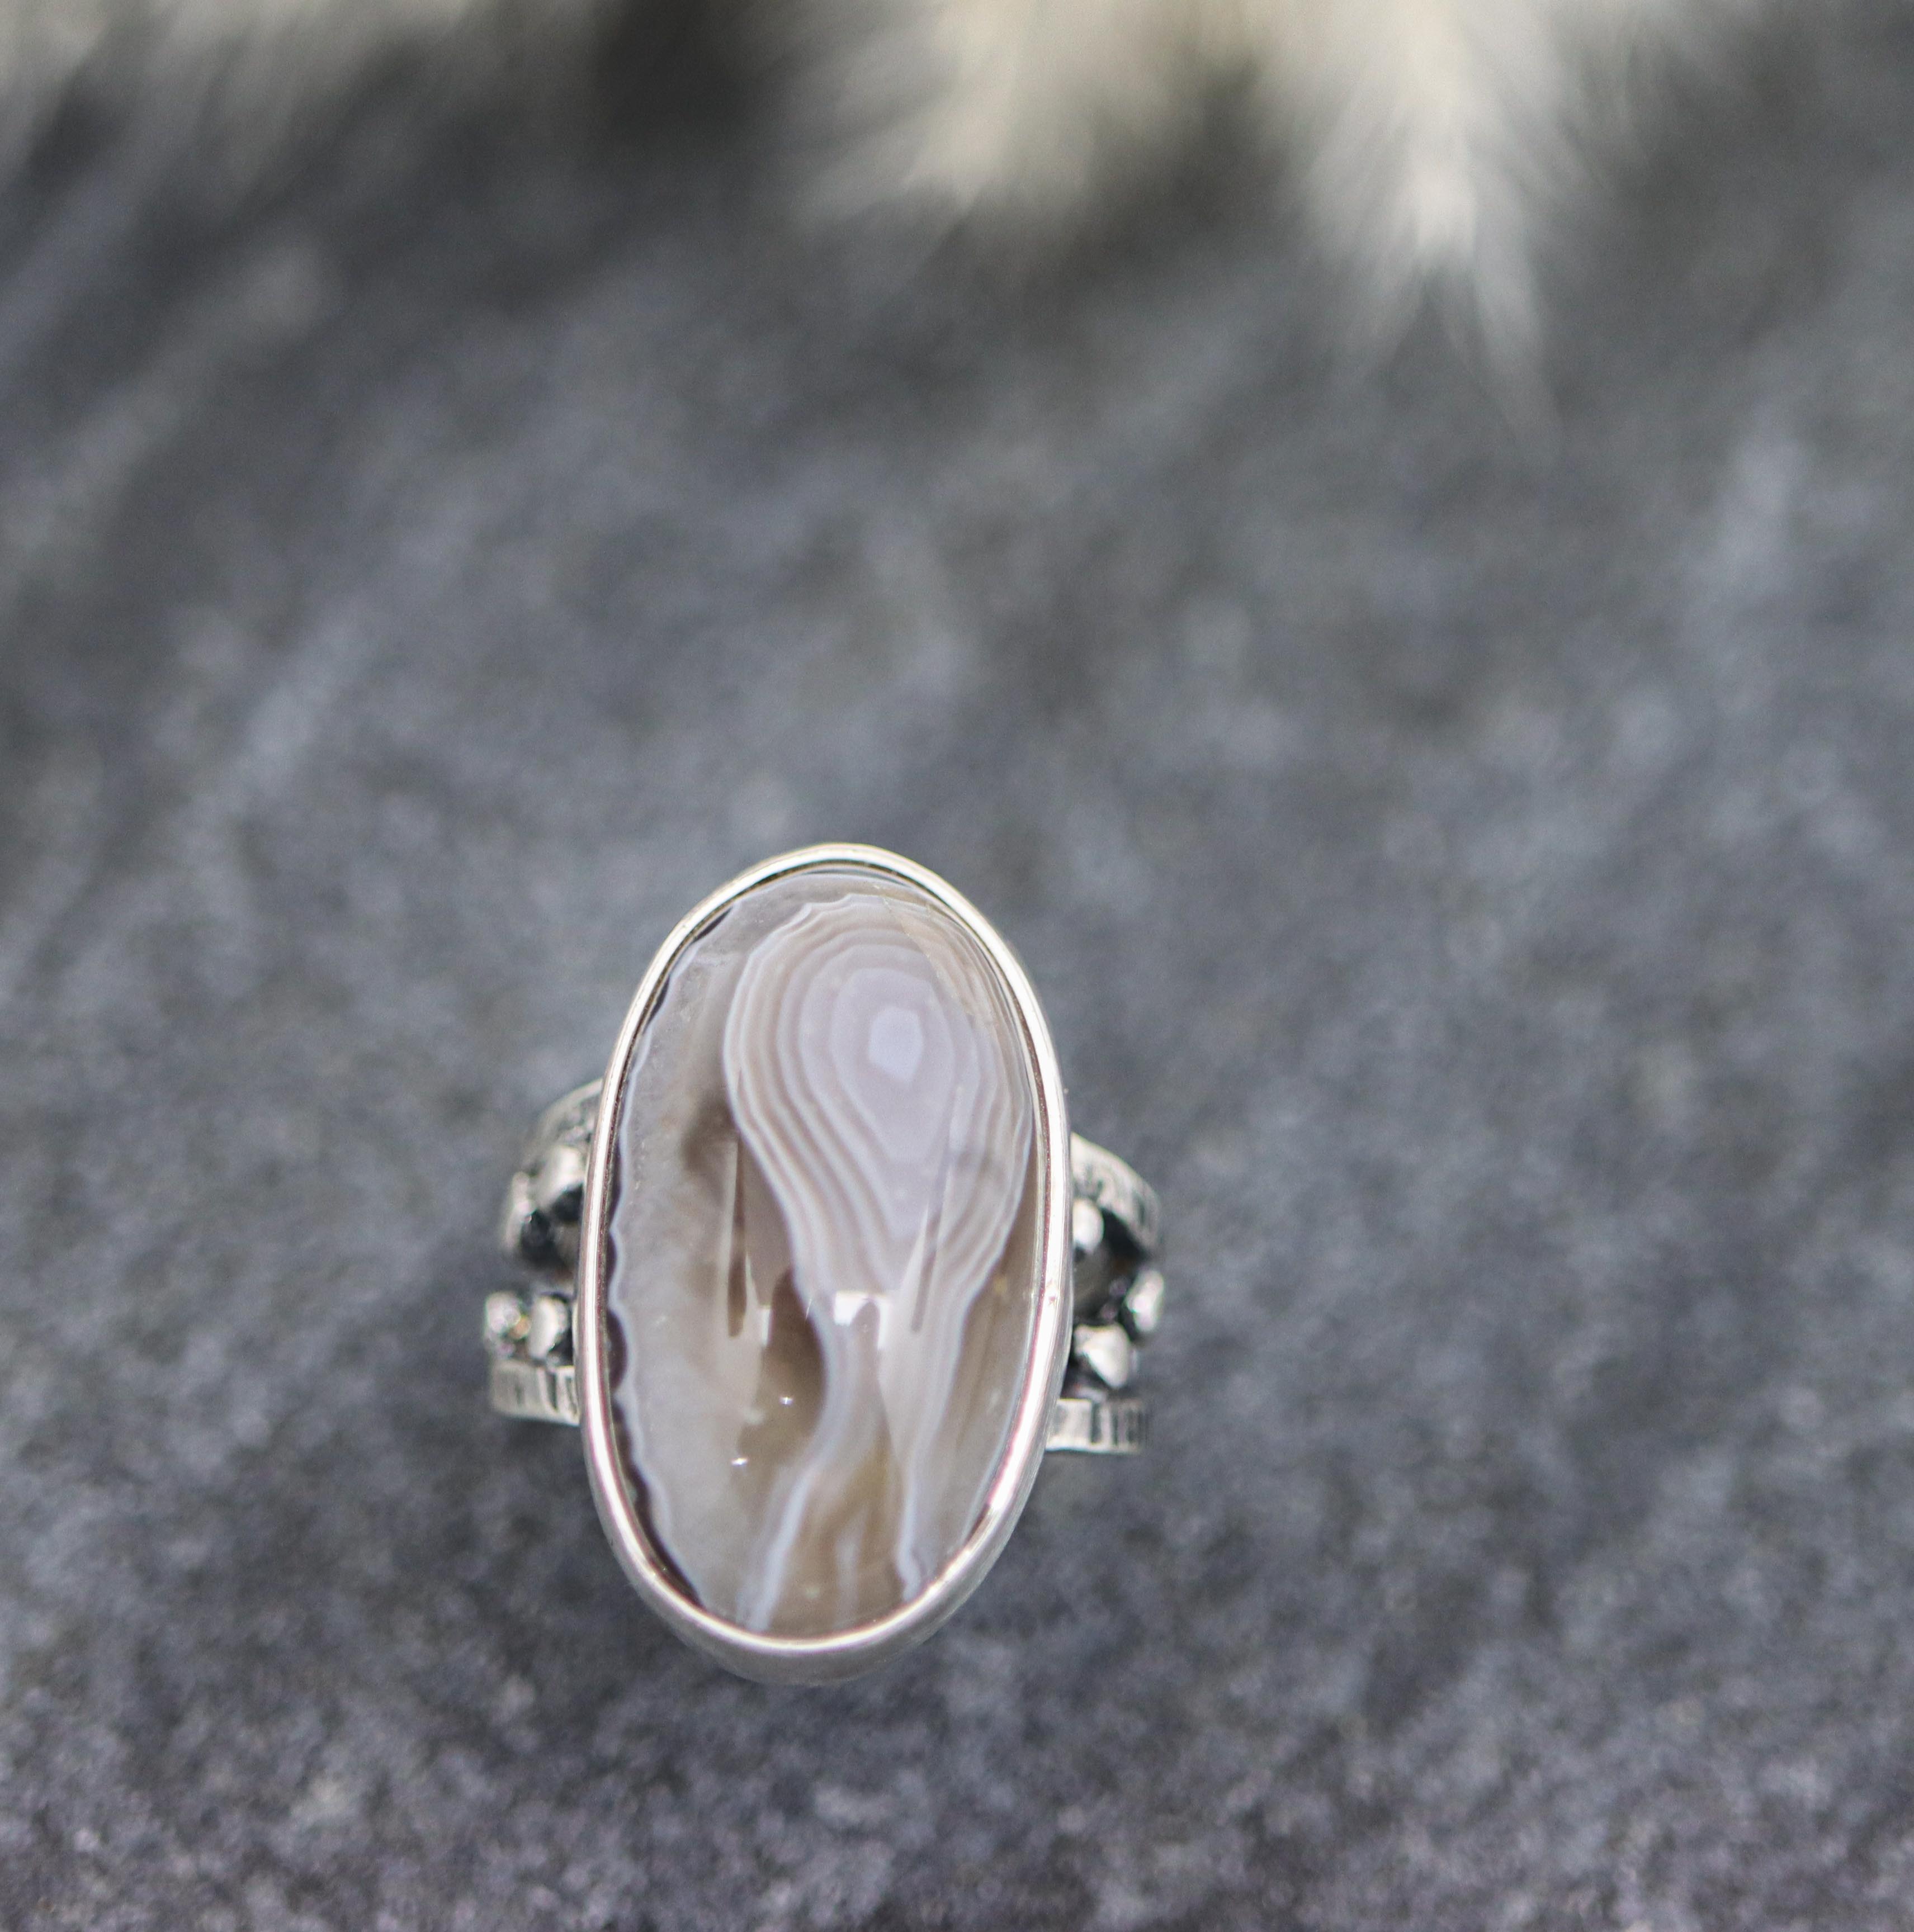 *ON SALE* Botswana Agate Sterling Silver Bubble Band Ring Size 6